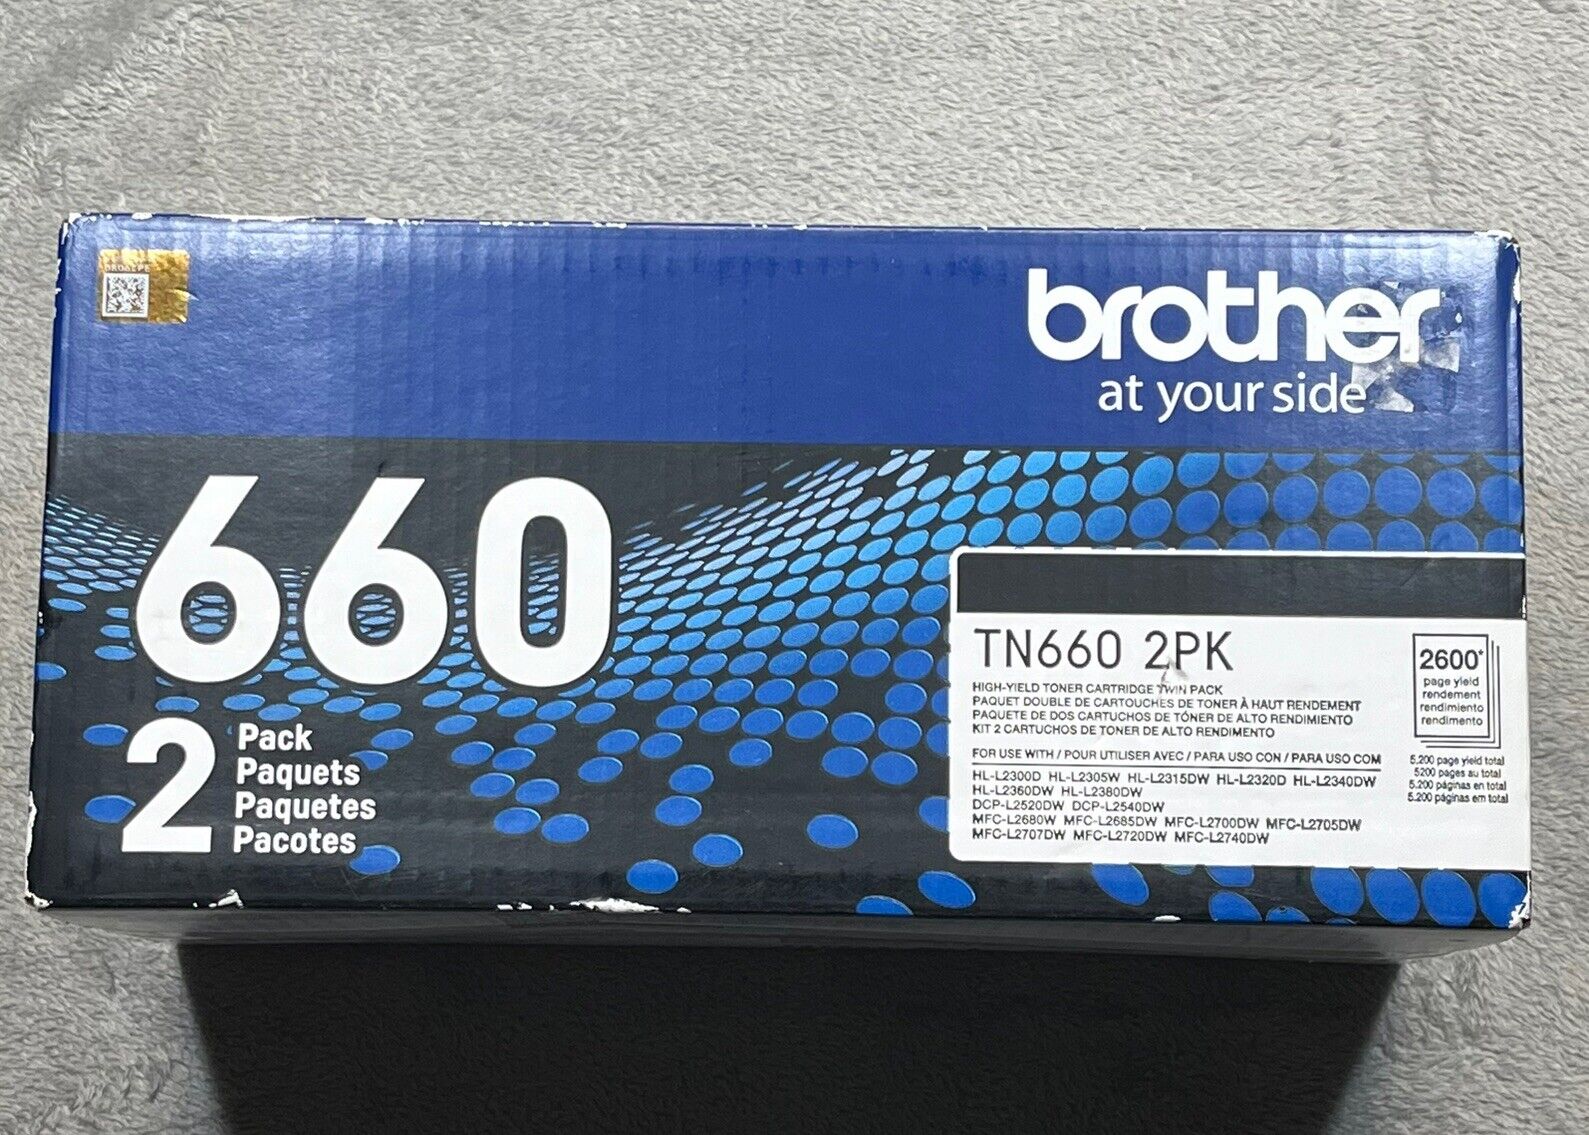 Twin Pack Brother TN-660 GENUINE High Yield Laser Toner Cartridges New Sealed